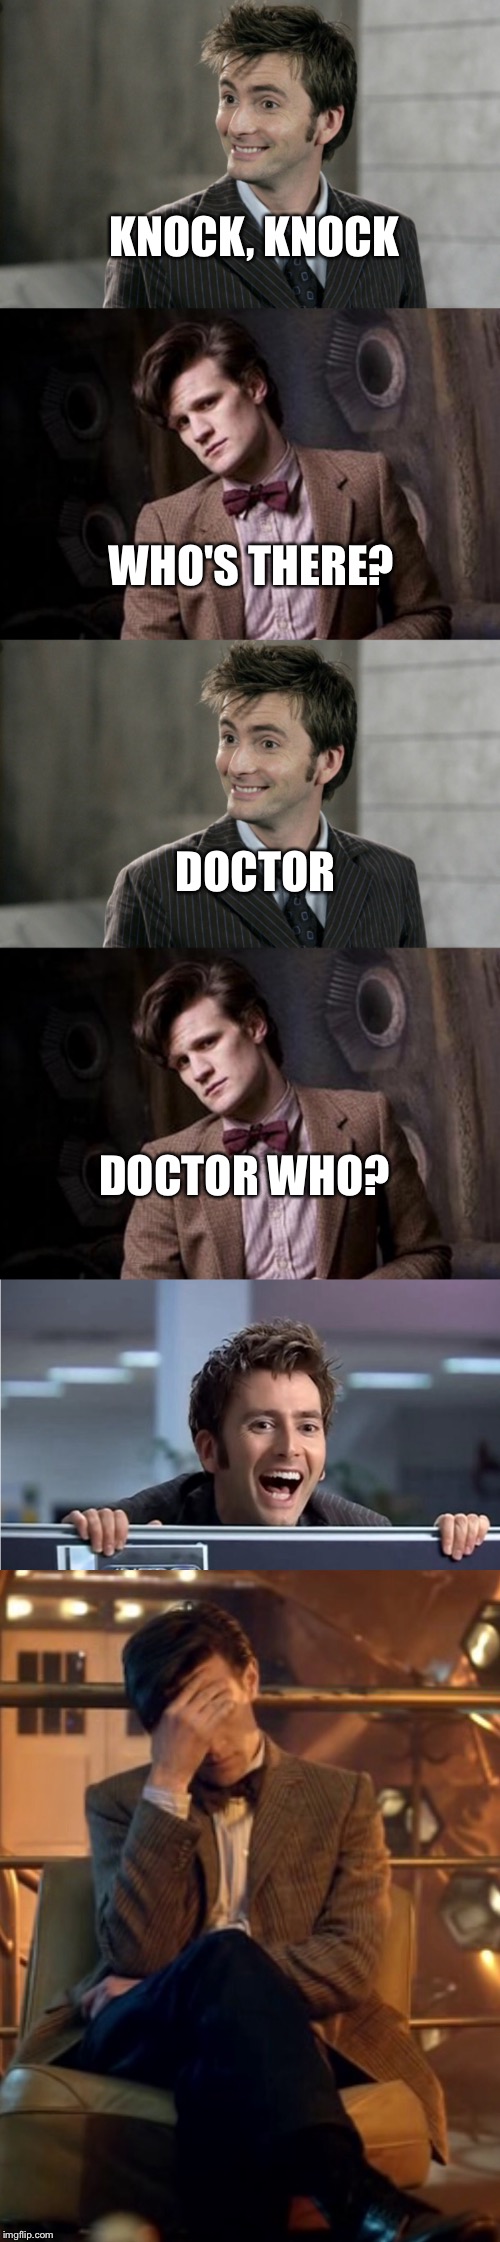 KNOCK, KNOCK; WHO'S THERE? DOCTOR; DOCTOR WHO? | image tagged in funny,doctor who | made w/ Imgflip meme maker